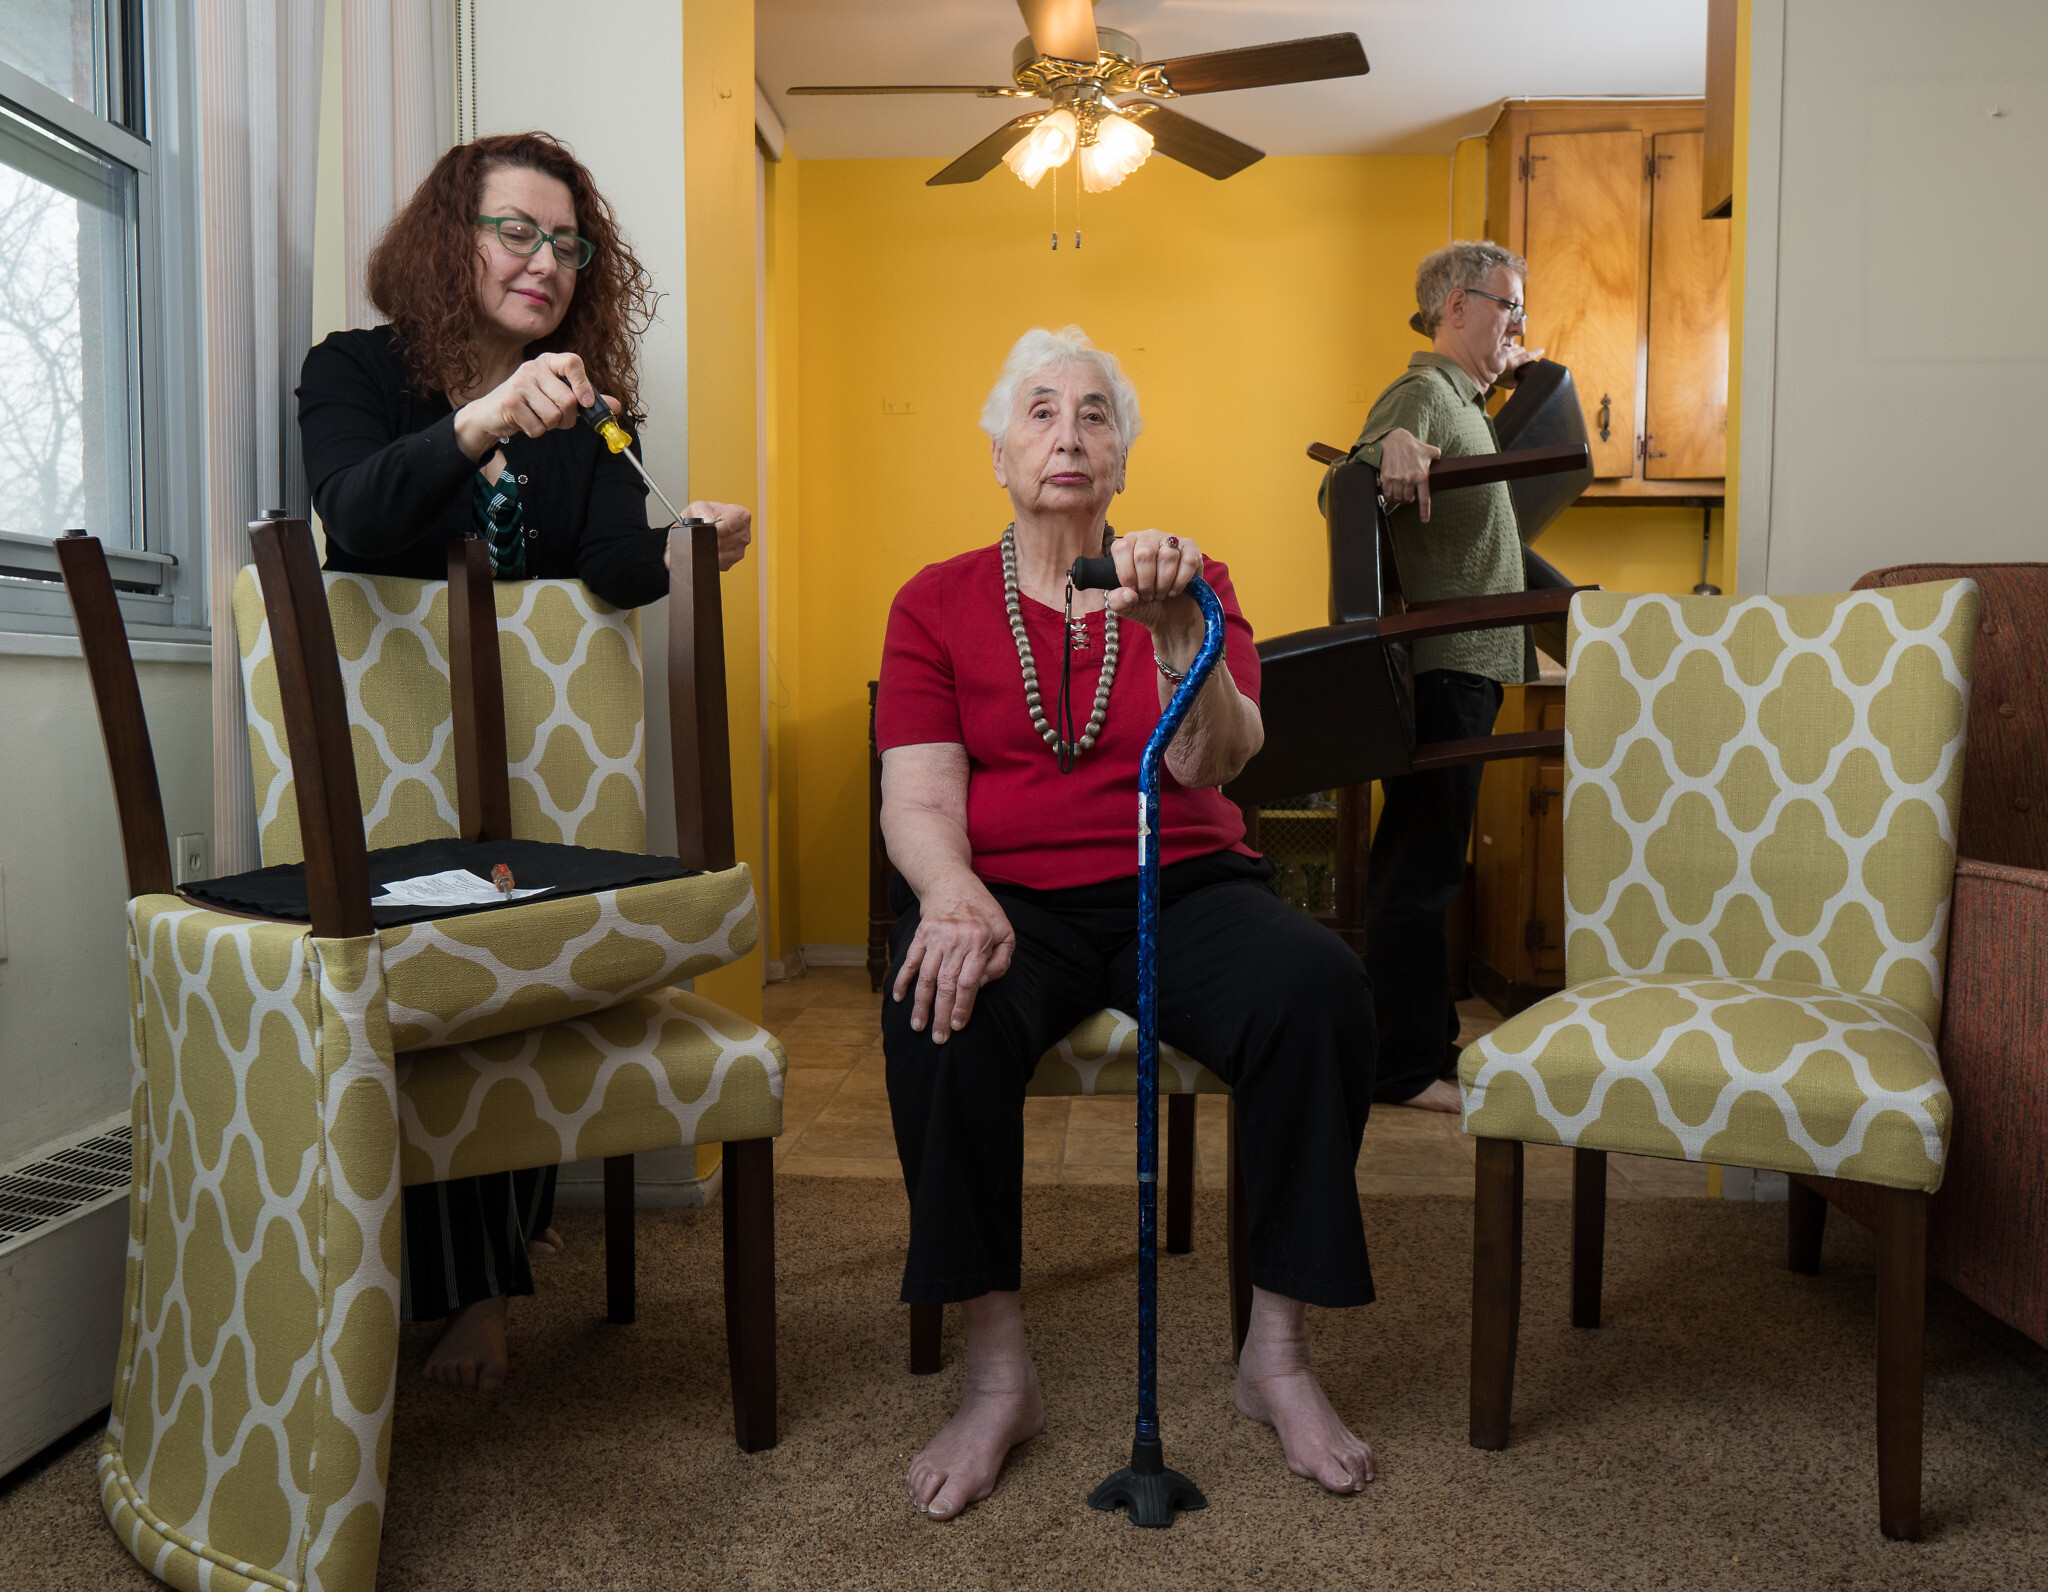 NY photographer humorously captures life under quarantine with mom and ex-wife The Times of Israel